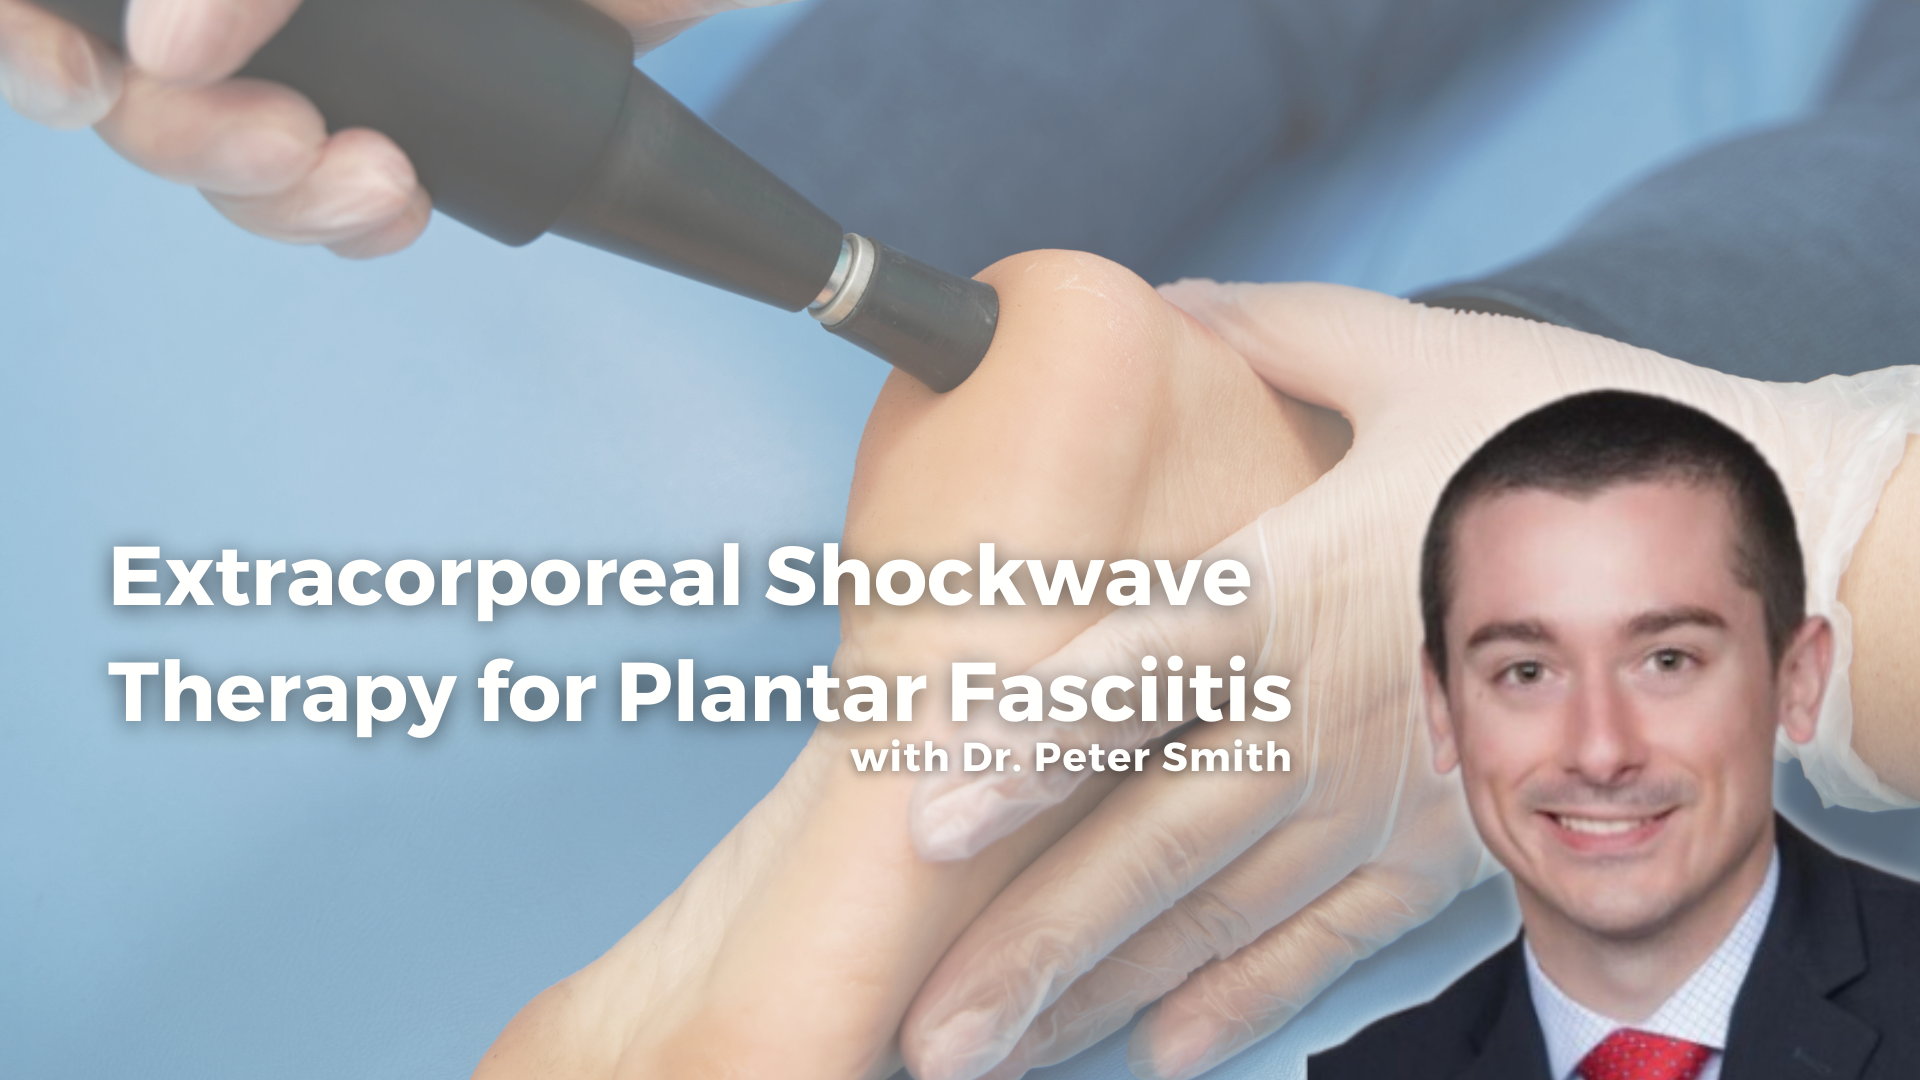 Extracorporeal Shockwave Therapy for Plantar Fasciitis